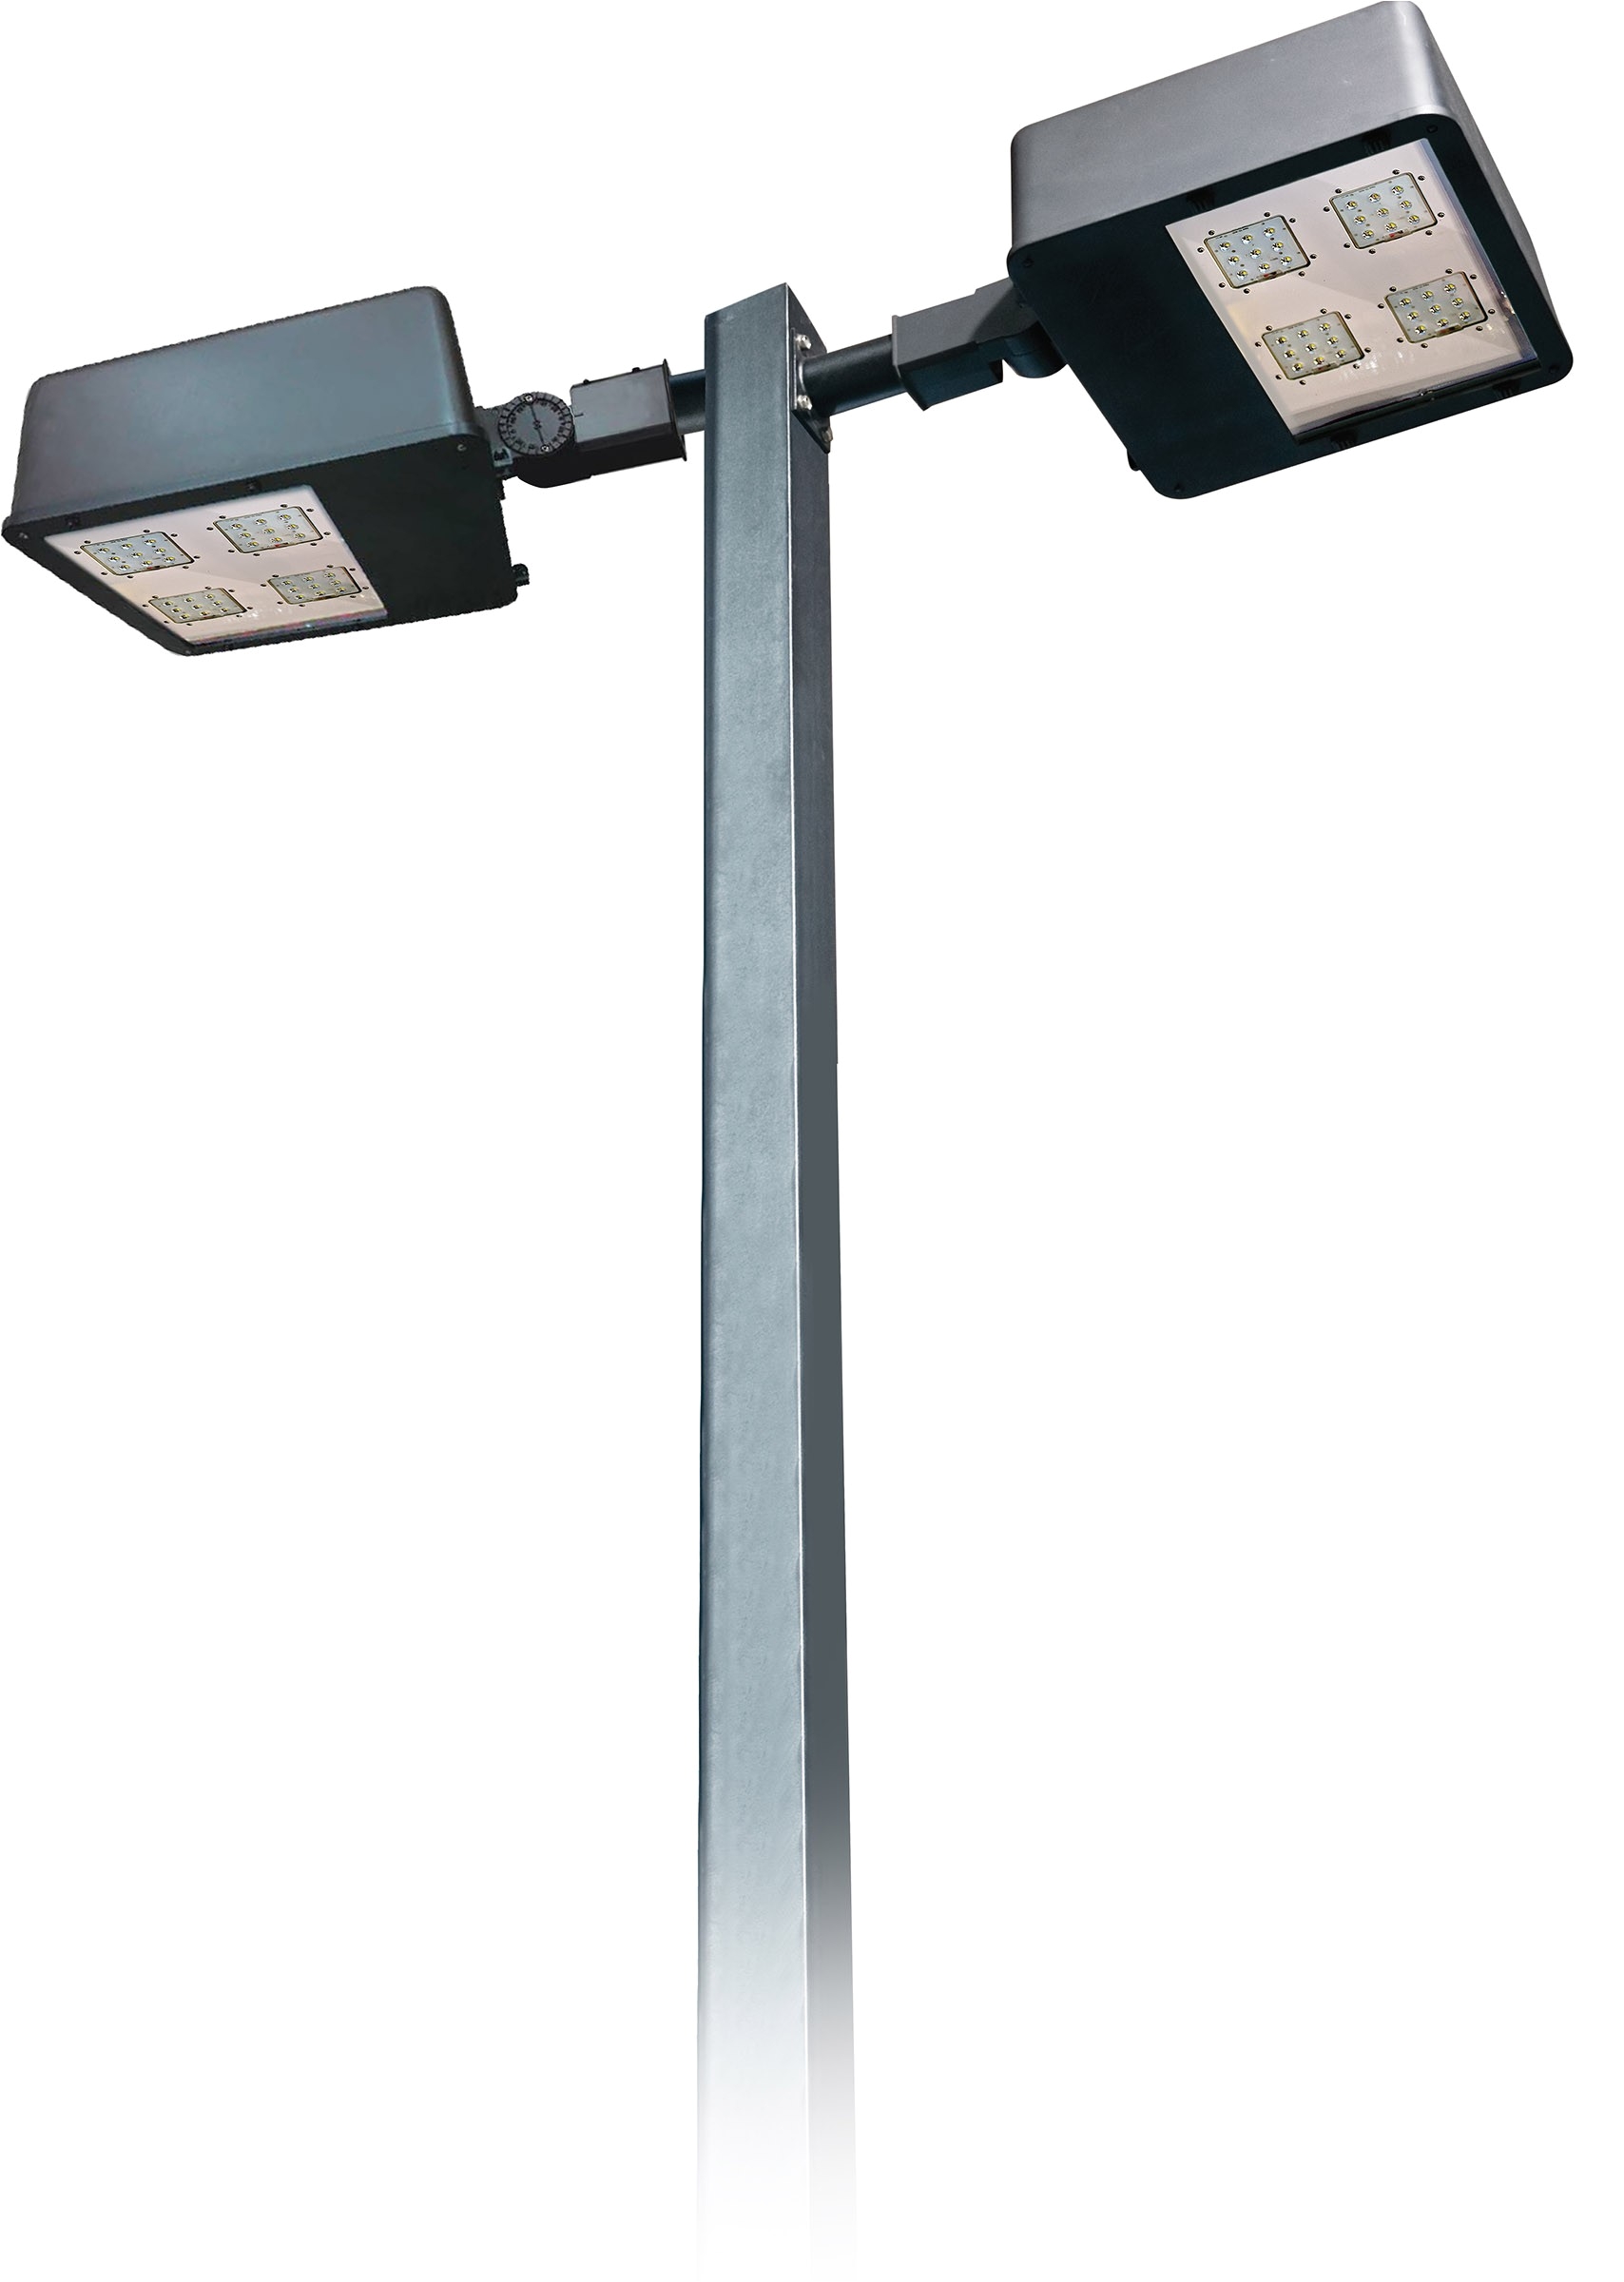 df led 7750 double headed powder coated cast aluminum post light with pole parking lot